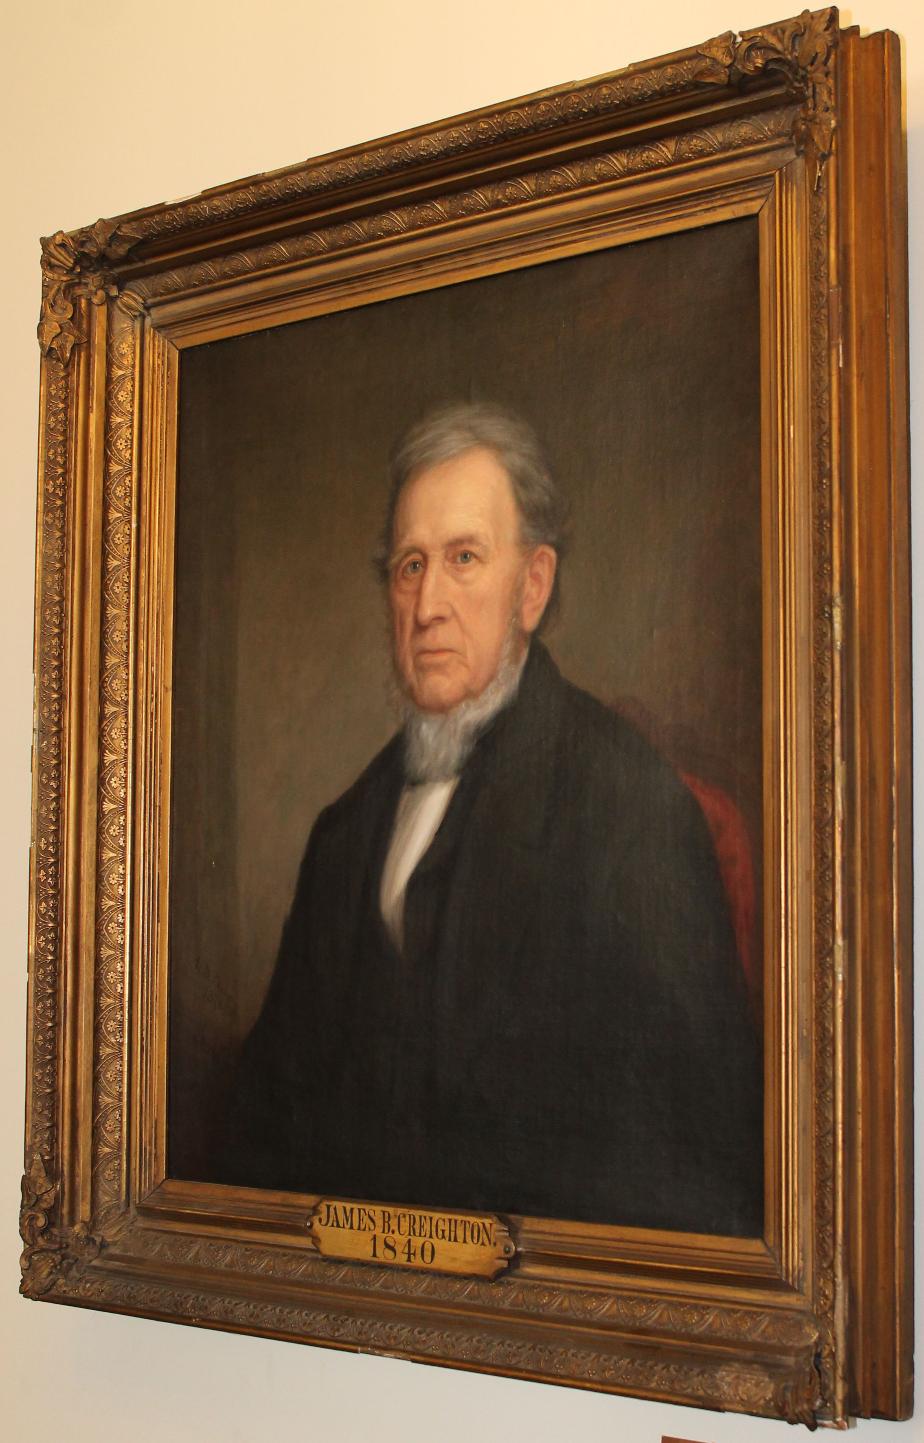 Colonel James Bracket Creighton NH State House Portrait